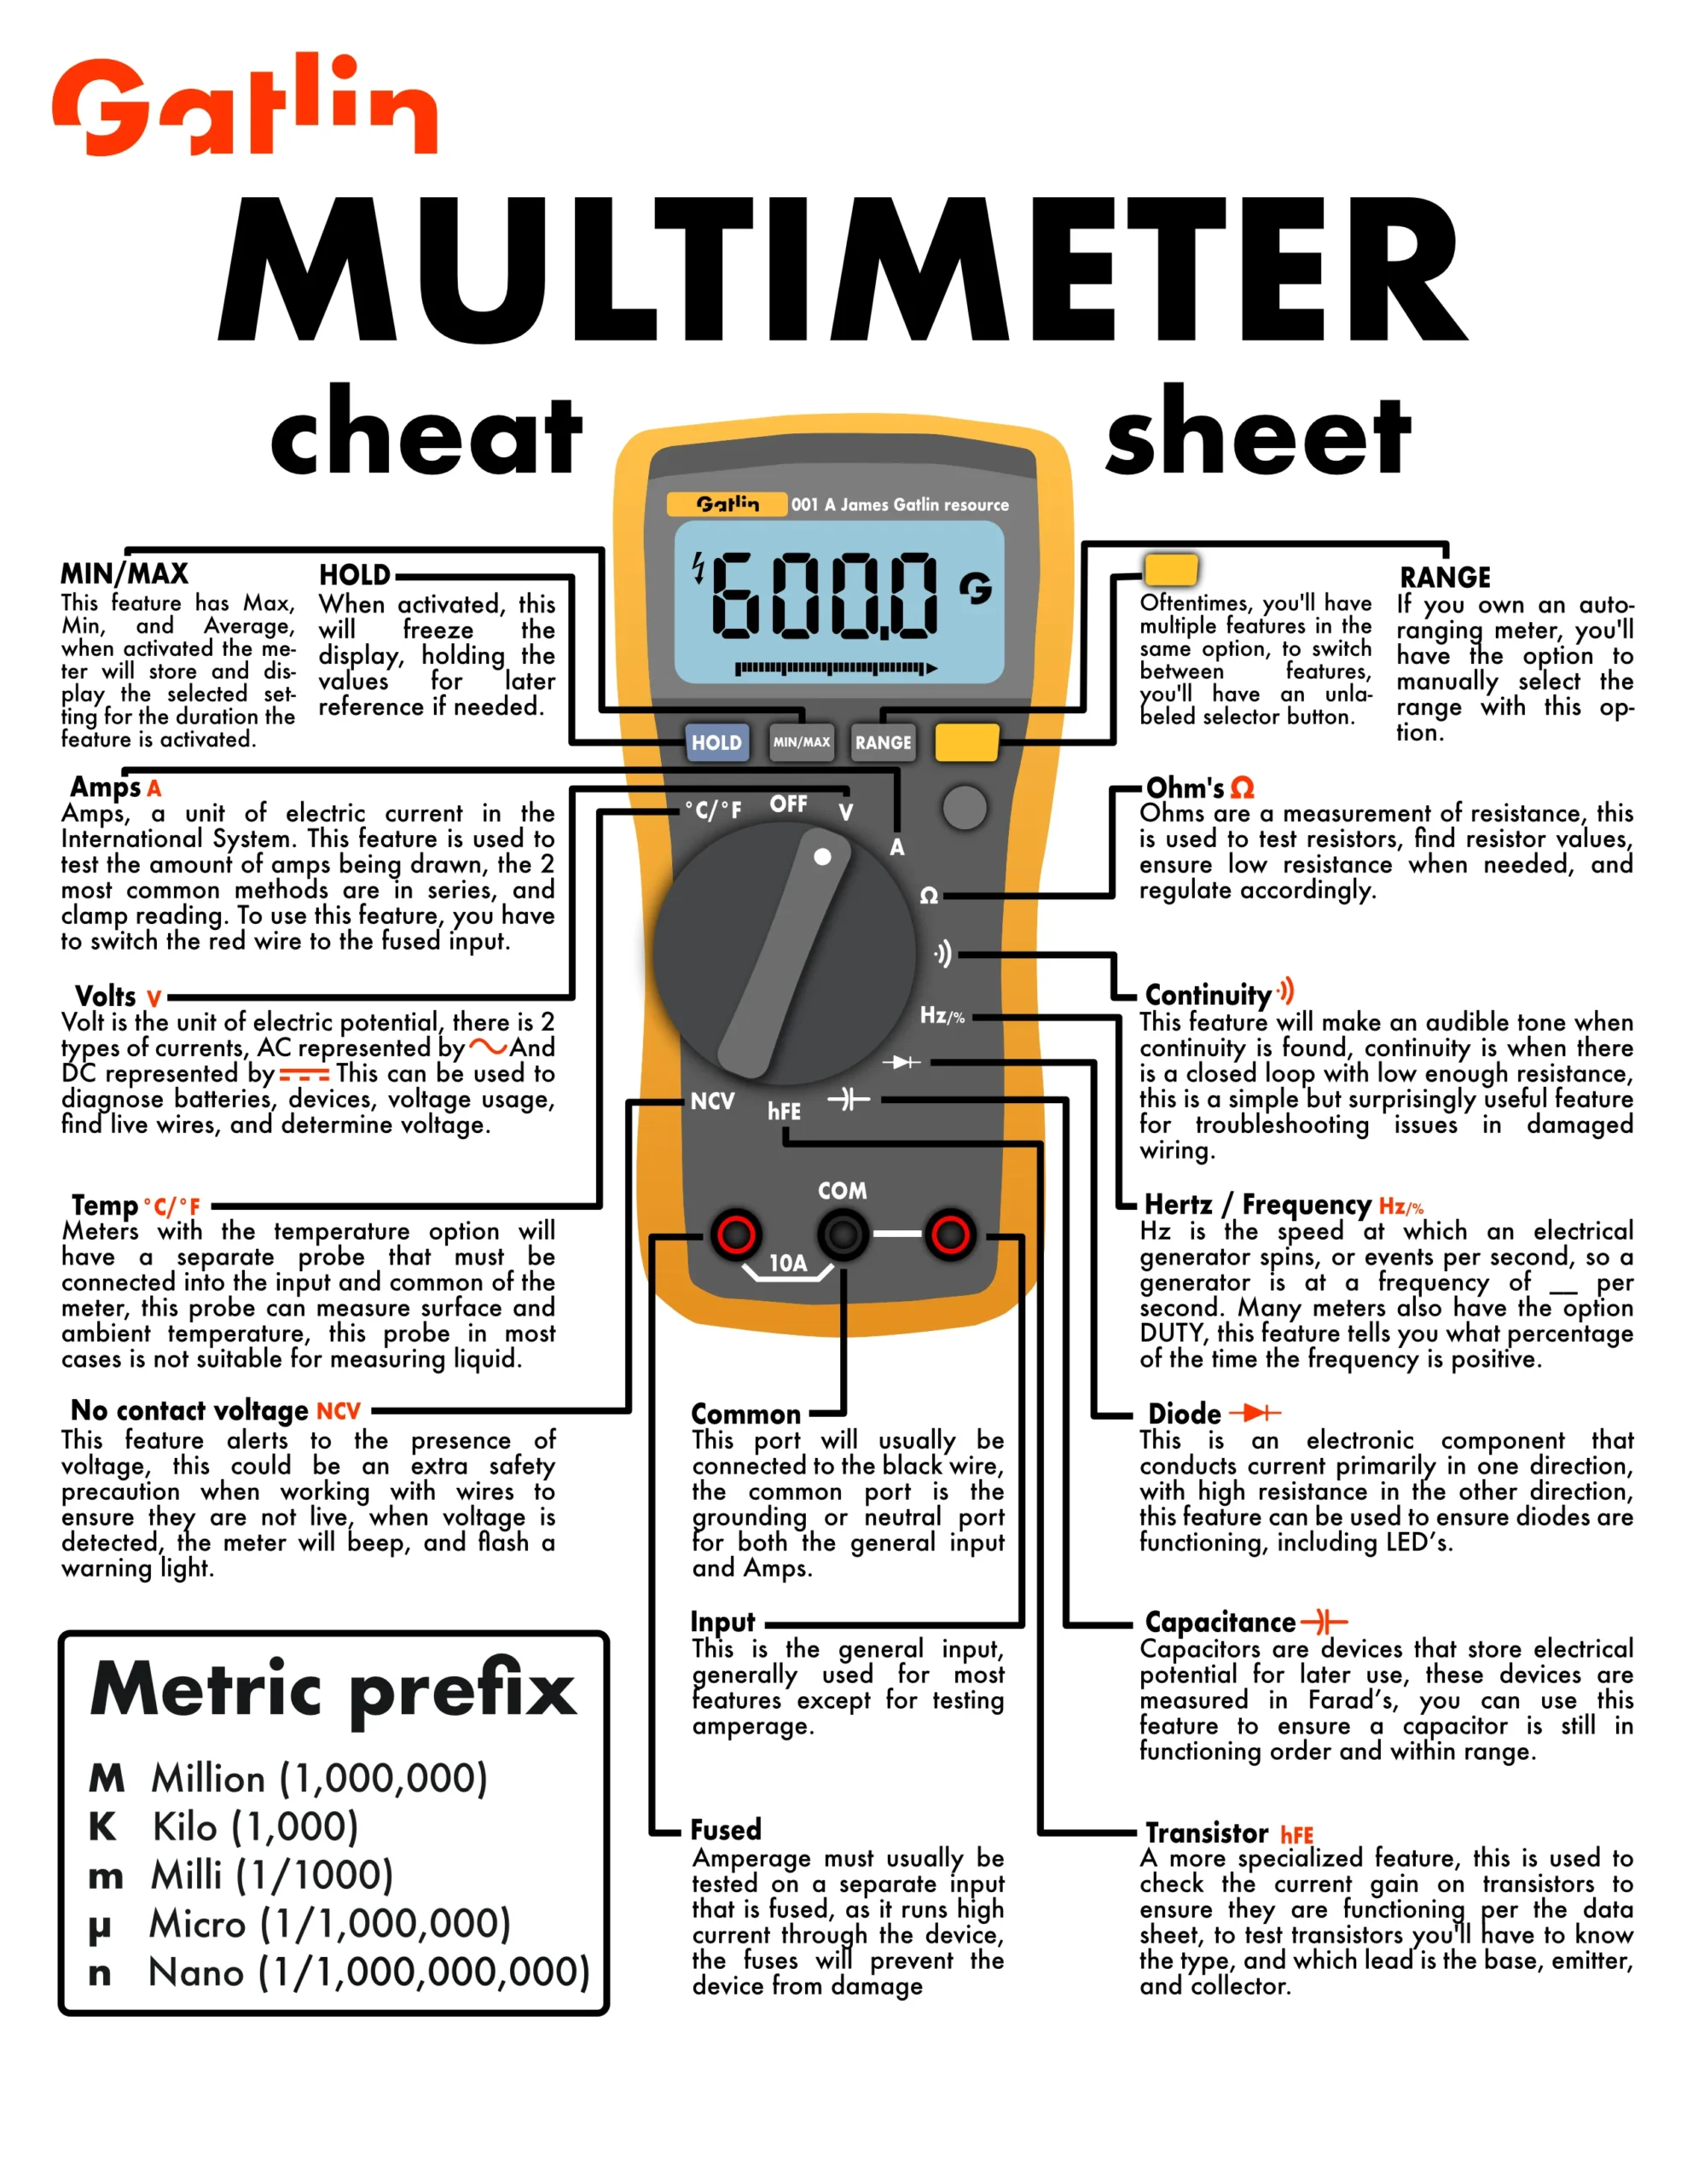 Educational cheat sheet for multimeter features and measurements displayed beside a multimeter.